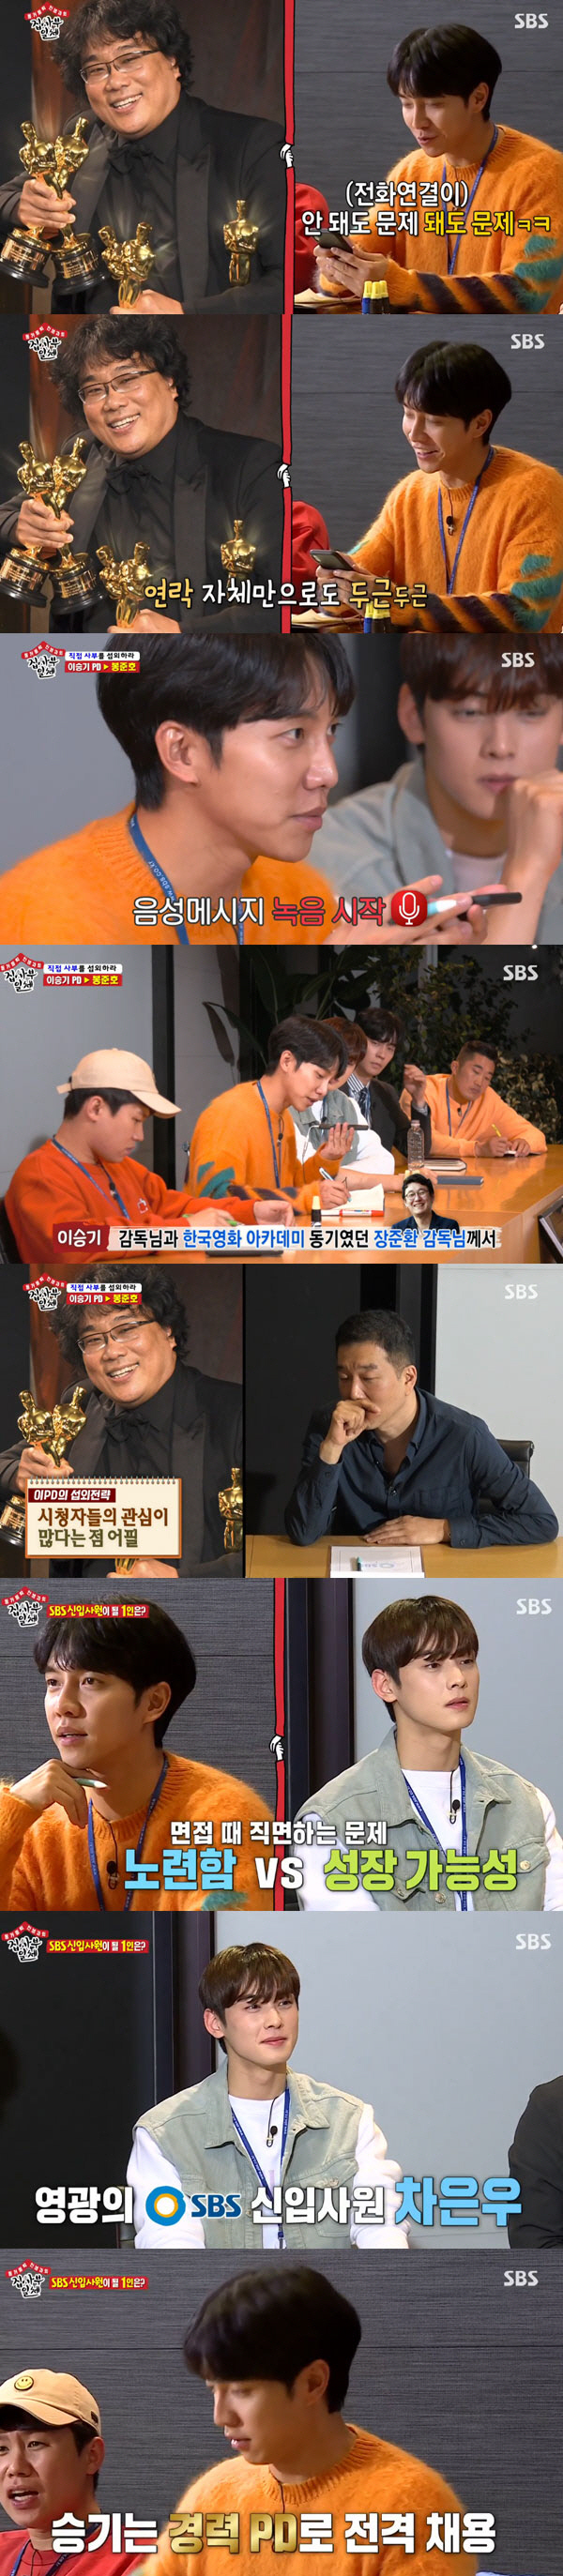 From Baek Jong-won and Ma Dong-Seok to Bong Joon-ho, All The Butlers members went directly to Moonlighting.On the 26th, SBS entertainment program All The Butlers was decorated with Broadcasting Station 24 oclock special after last week.The members struggle to be selected as SBS Super Rookie was included.The members who met with Hyun Woo and Choi Ye-rim anchor who are conducting SBS 8 oclock news last week and got the opportunity to participate in the news.At the end of the mission, Lee Seung-gi had a chance to broadcast sports news and Cha Eun-woo had the opportunity to participate in radio news live.Lee Seung-gi, who was in the exclusive closing of sports news, made a mistake by preparing for rehearsal in tension.While Lee Seung-gi made a mistake, the radio broadcast began, and Cha Eun-woo was perfectly successful from English language interview to next news delivery even in the tension.Finally, Lee Seung-gis turn and news began with sports news signal music.Lee Seung-gi was praised by anchors for his nervous appearance and perfect closing comment.The Hyun Woo anchor admired it, saying, It is enough to replace Yoon Sang-i right now.Following the editing, the task of referring to the master was also followed.Shin Sung-rok called Han Ji-min and tried to get in touch, but Han Ji-min said, Ill text you. He hung up and sent an emoticon to laugh.Cha Eun-woo called You Hee-yeol, who was happy to get the call but after grasping the situation, said: This friend is turning more than he looks?, blasting a stone fastball, making the crowd laugh.Yang Se-hyeong called Baek Jong-won, who is appearing on the air together, and tried to get involved. Baek Jong-won said, What am I going to do? But he decided to invite the members home after saying I will try hard to continue persuasion.Kim Dong-Hyun called actor Ma Dong-Seok.He persuaded him that he was resting while preparing to shoot Crime City 2 and eventually got a promise saying, I will make fun time when time comes.Lee Seung-gi called the master Bong Joon-ho, who said even before calling: Its a problem, even if its not a problem.I hope I can not be honest, he said, but he did not get a phone call. Lee Seung-gi left a voice message saying he wanted to be invited.After all the missions, Choi Young-in finally announced the successful candidate. Choi chose him as Super Rookie, saying, I will select Cha Eun-woo after seeing the possibility of growth.After seeing Lee Seung-gi, who expressed regret, In fact, skill is also important; Lee Seung-gi is too hyperbolic to be a rookie.I will hire Seung-ki as a career PD. 